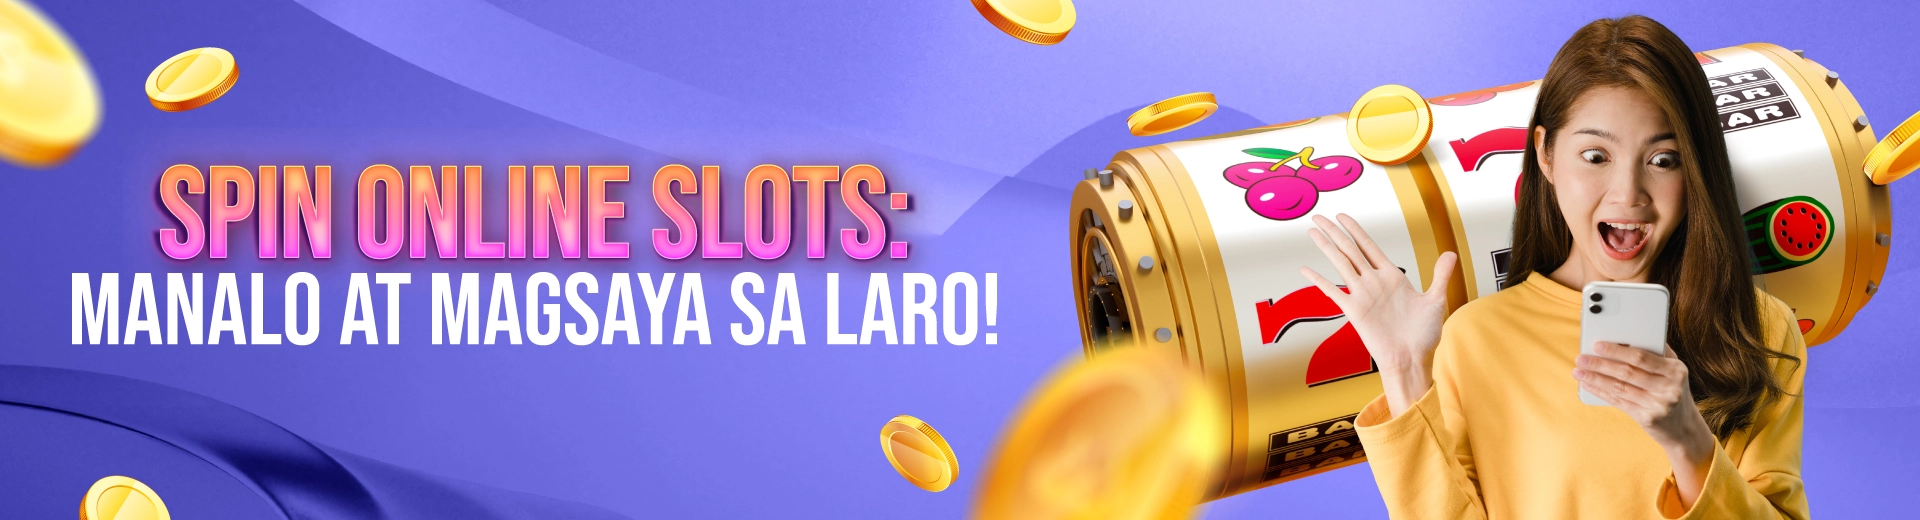 spin online slots